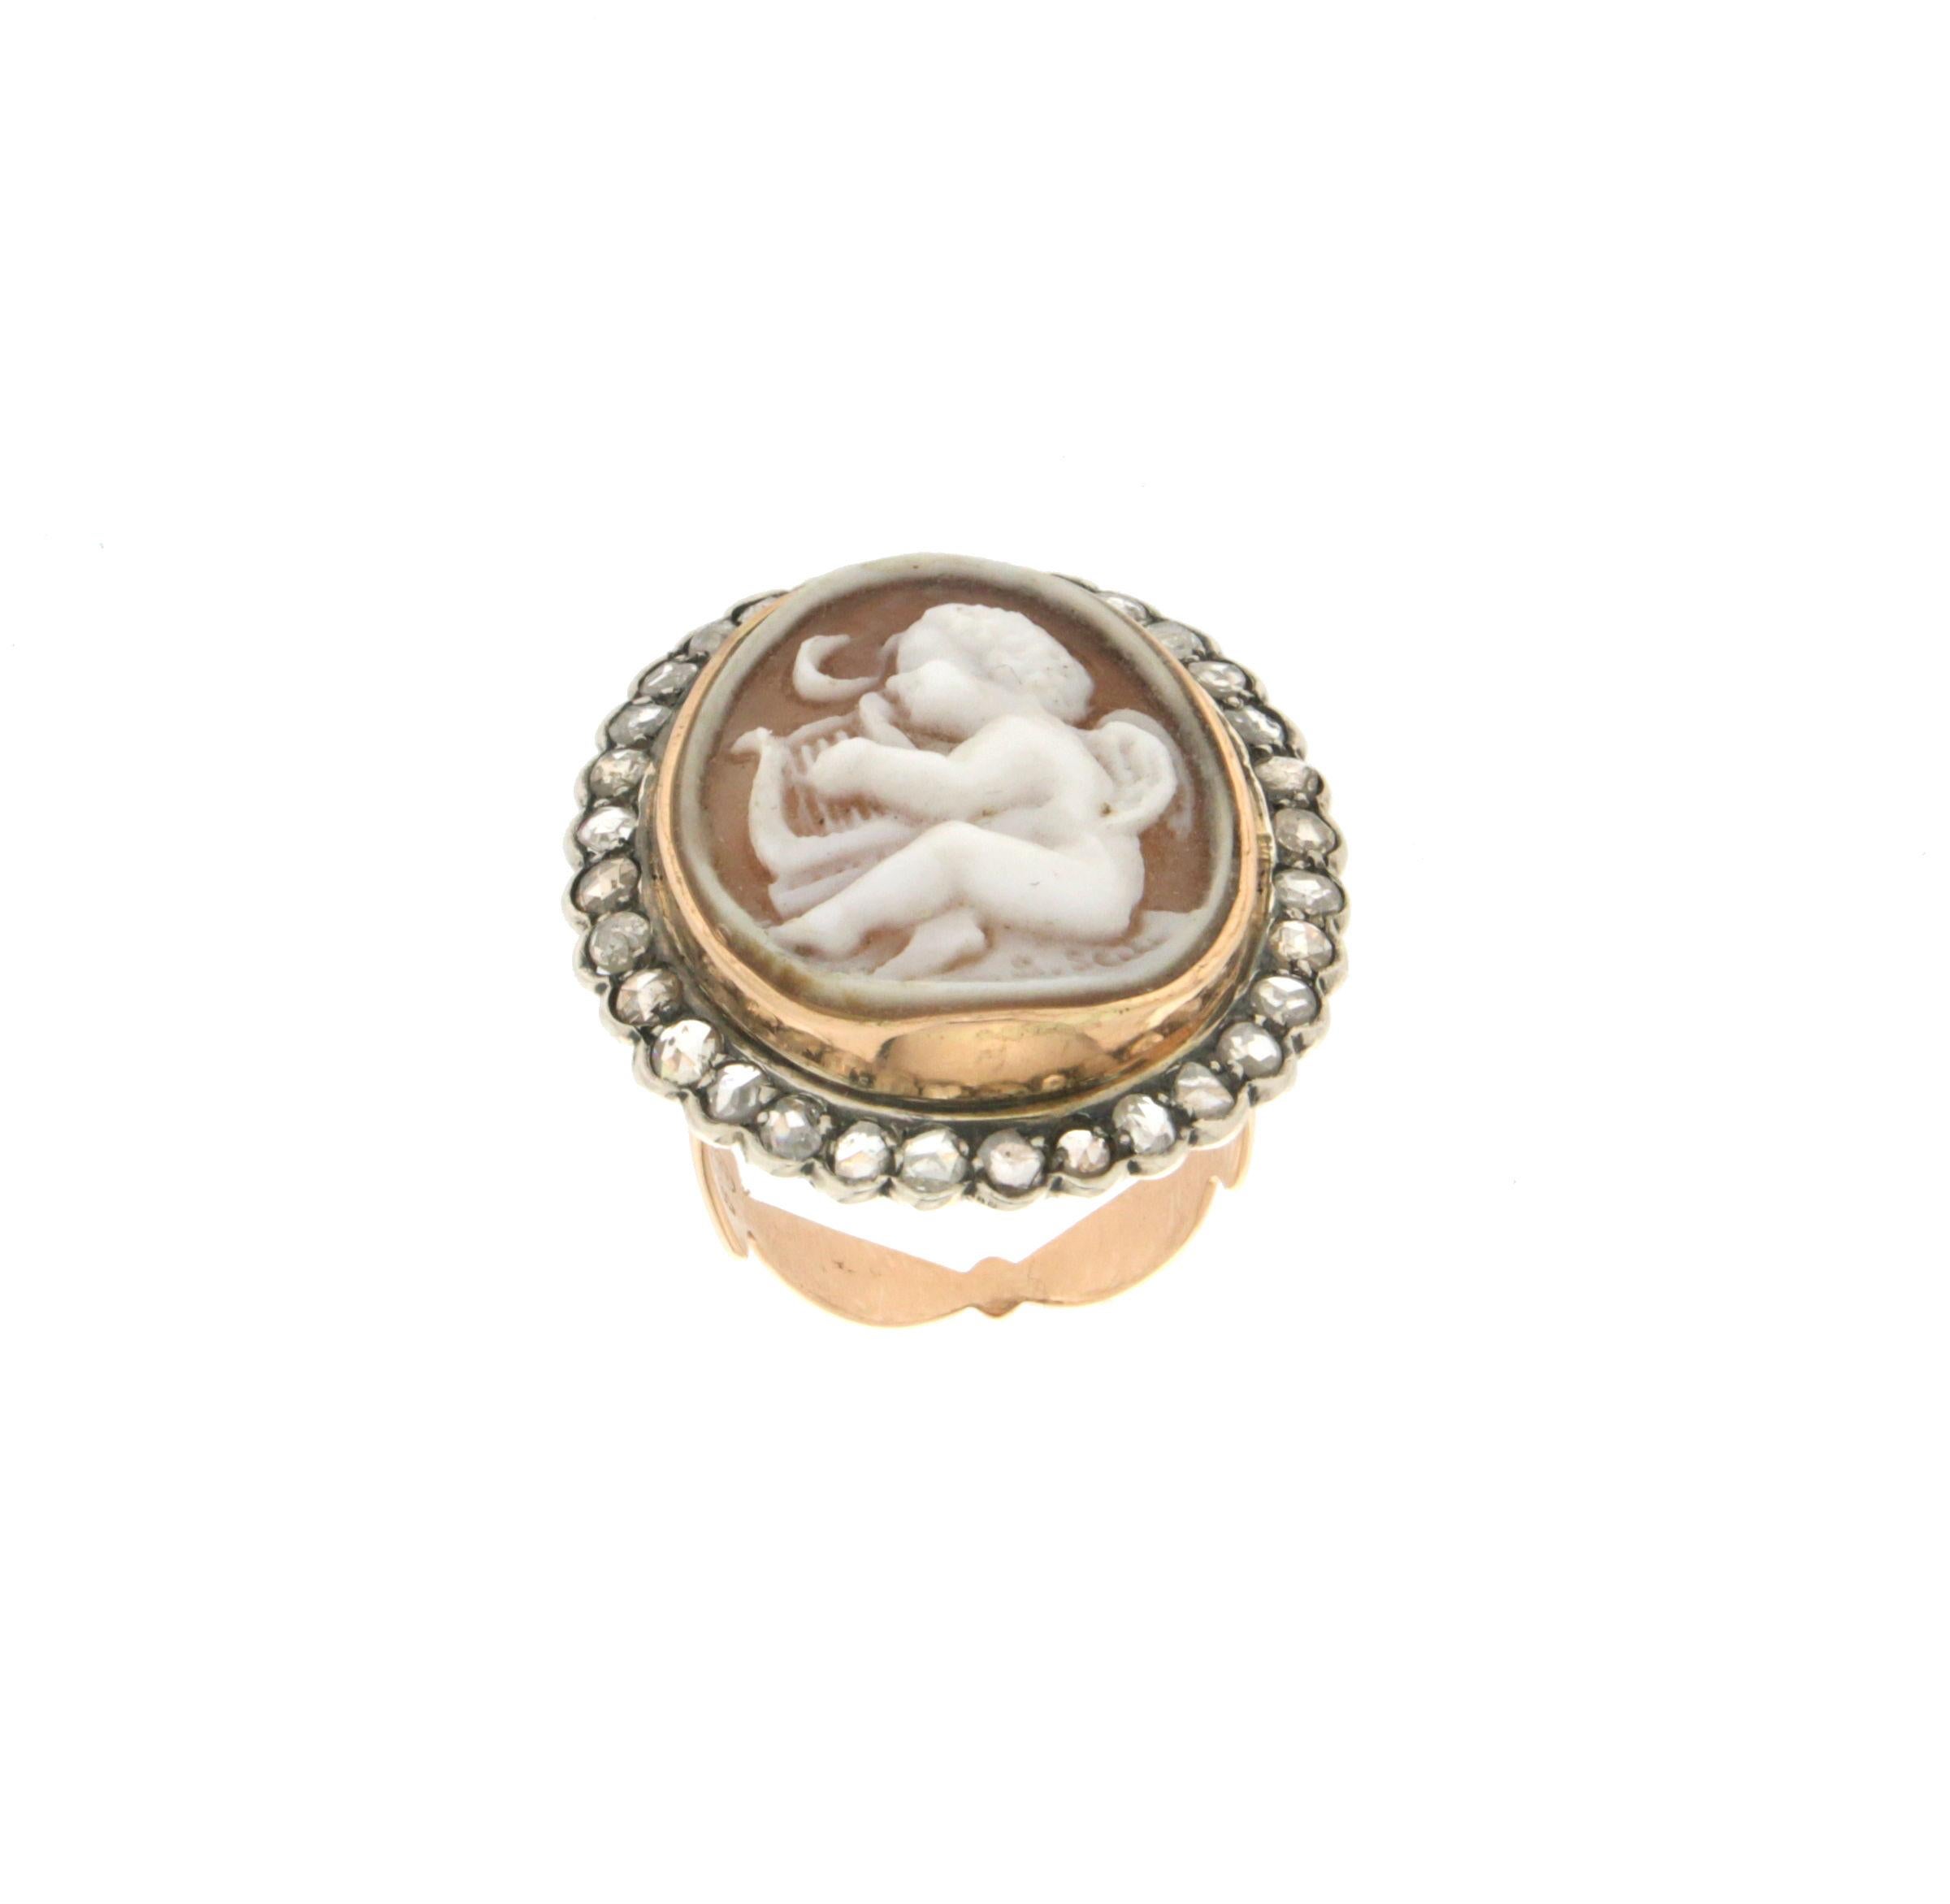 14 karat yellow gold and silver cocktail ring. Handmade by our artisans assembled with cameo and rose cut diamonds

Diamonds weight 1.46 karat
Ring total weight 2.60 grams
Ring size 8 US 17 Ita